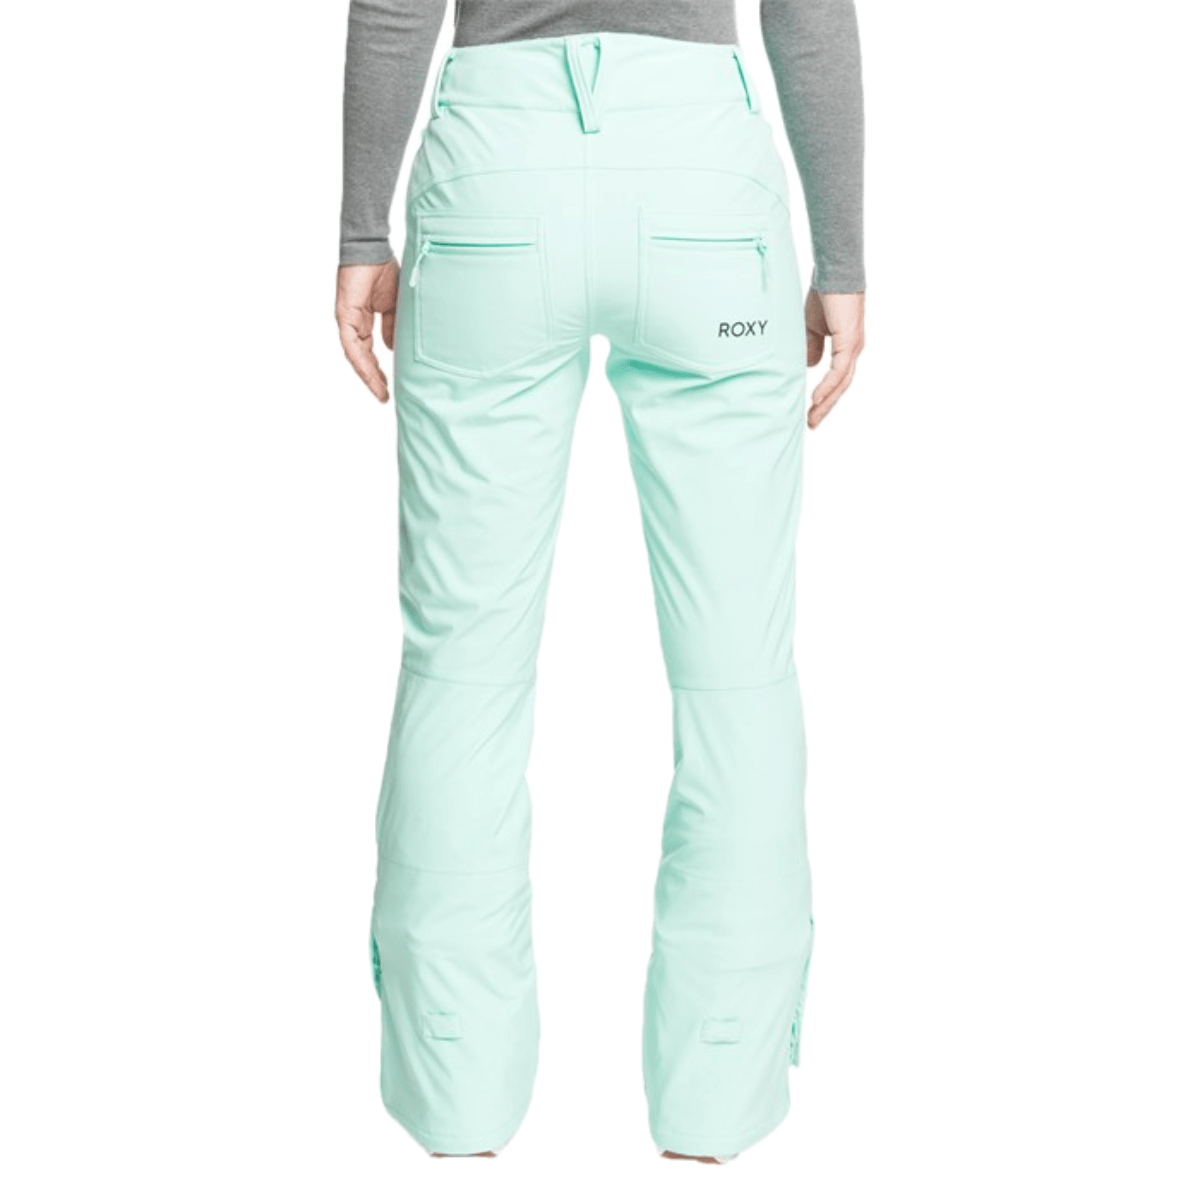 Roxy Creek Softshell Snow Pant - Women's - Al's Sporting Goods: Your  One-Stop Shop for Outdoor Sports Gear & Apparel